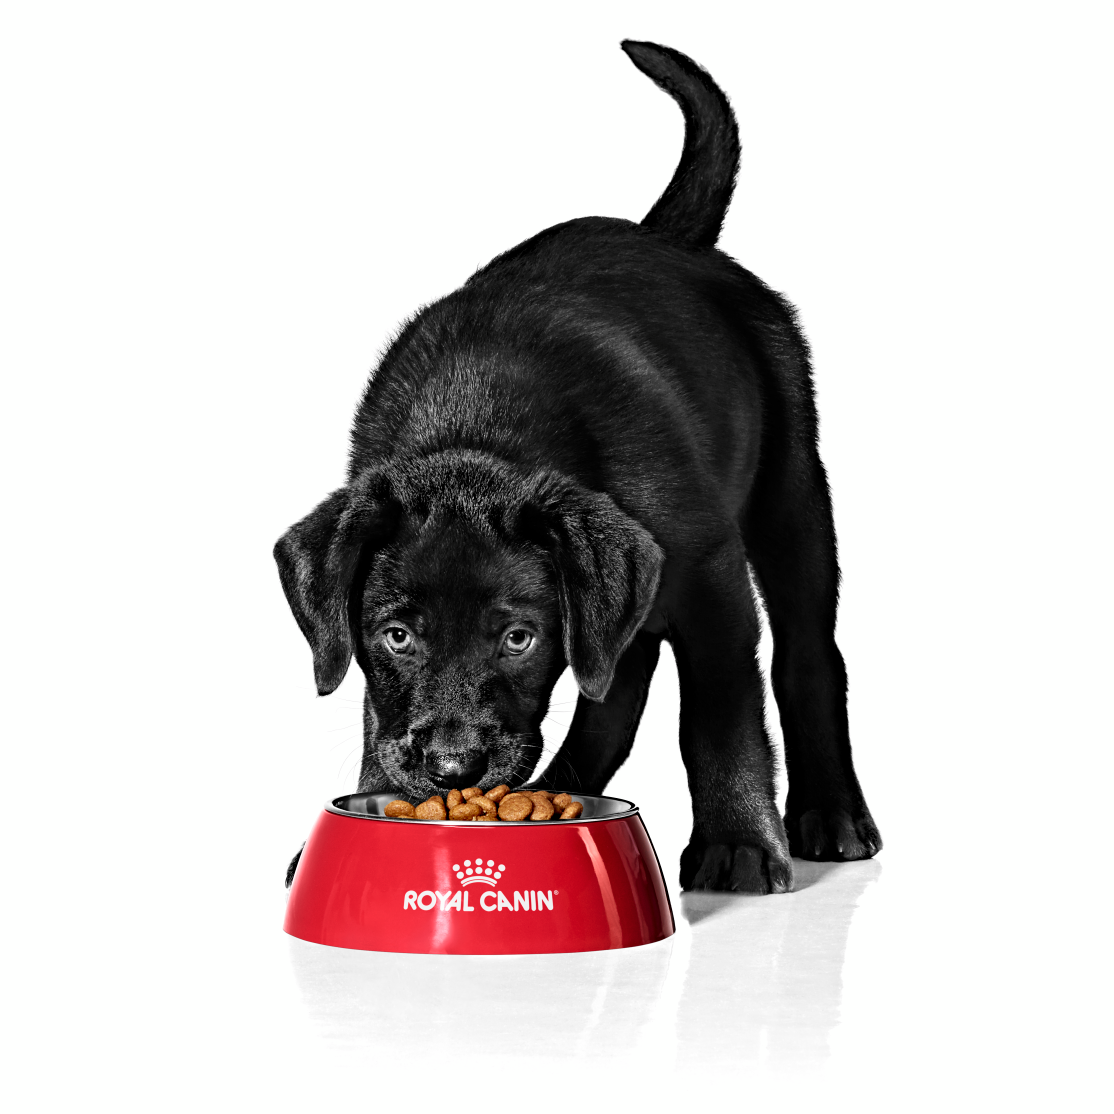 LABRADOR PUPPY EATING - START OF LIFE EMBLEMATIC